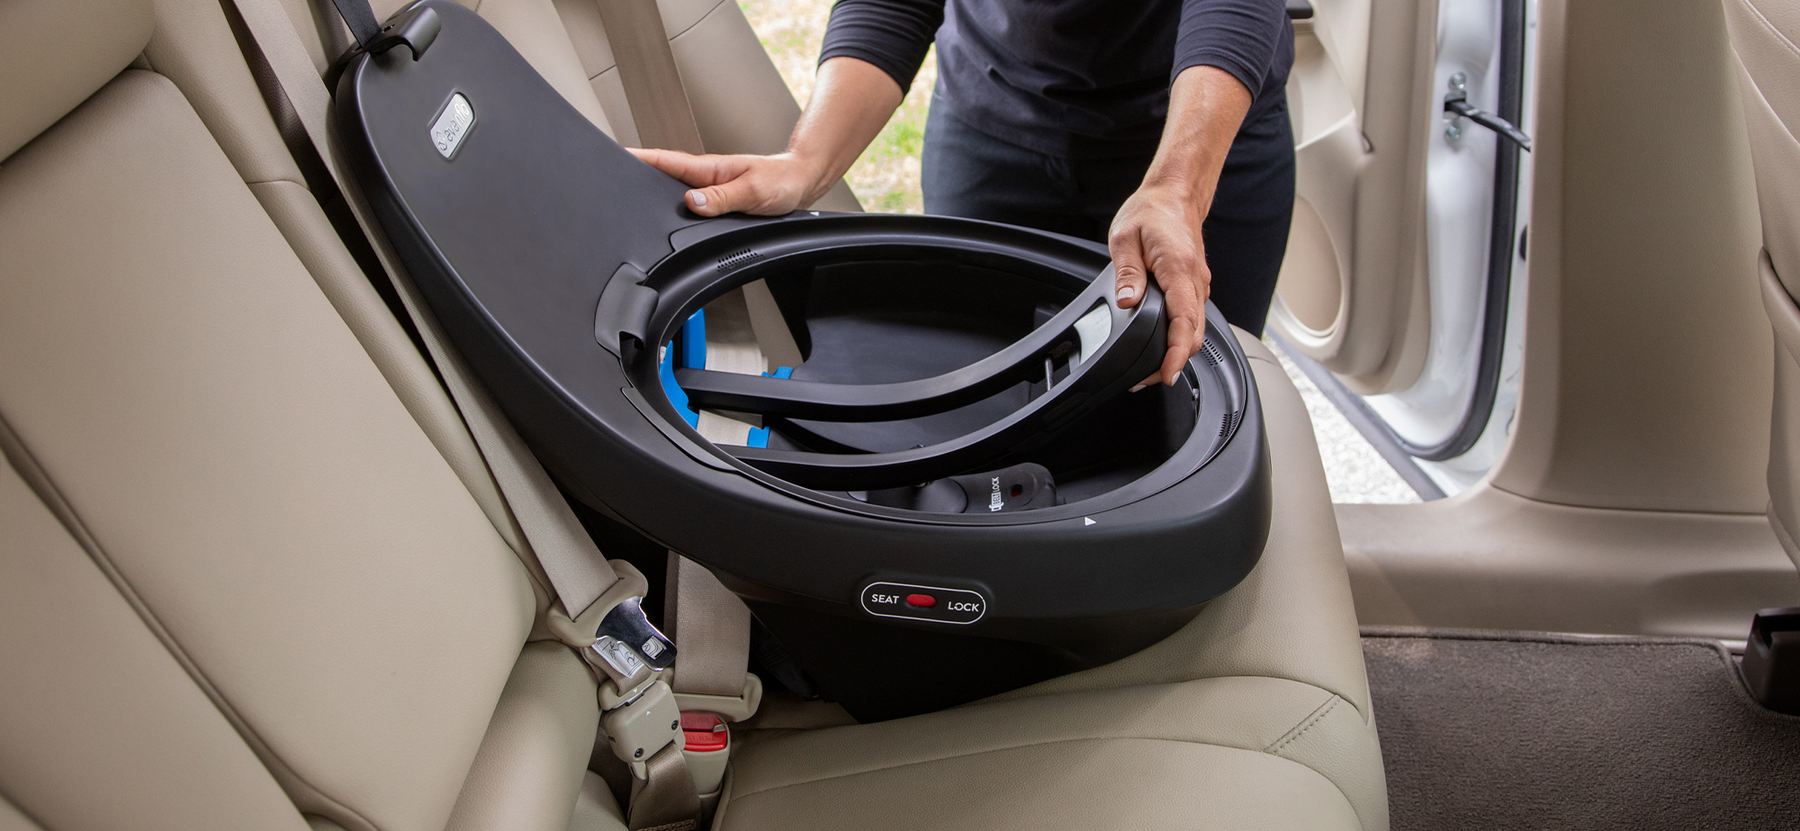 Image of hand holding car seat base in the car showing the seat lock feature.